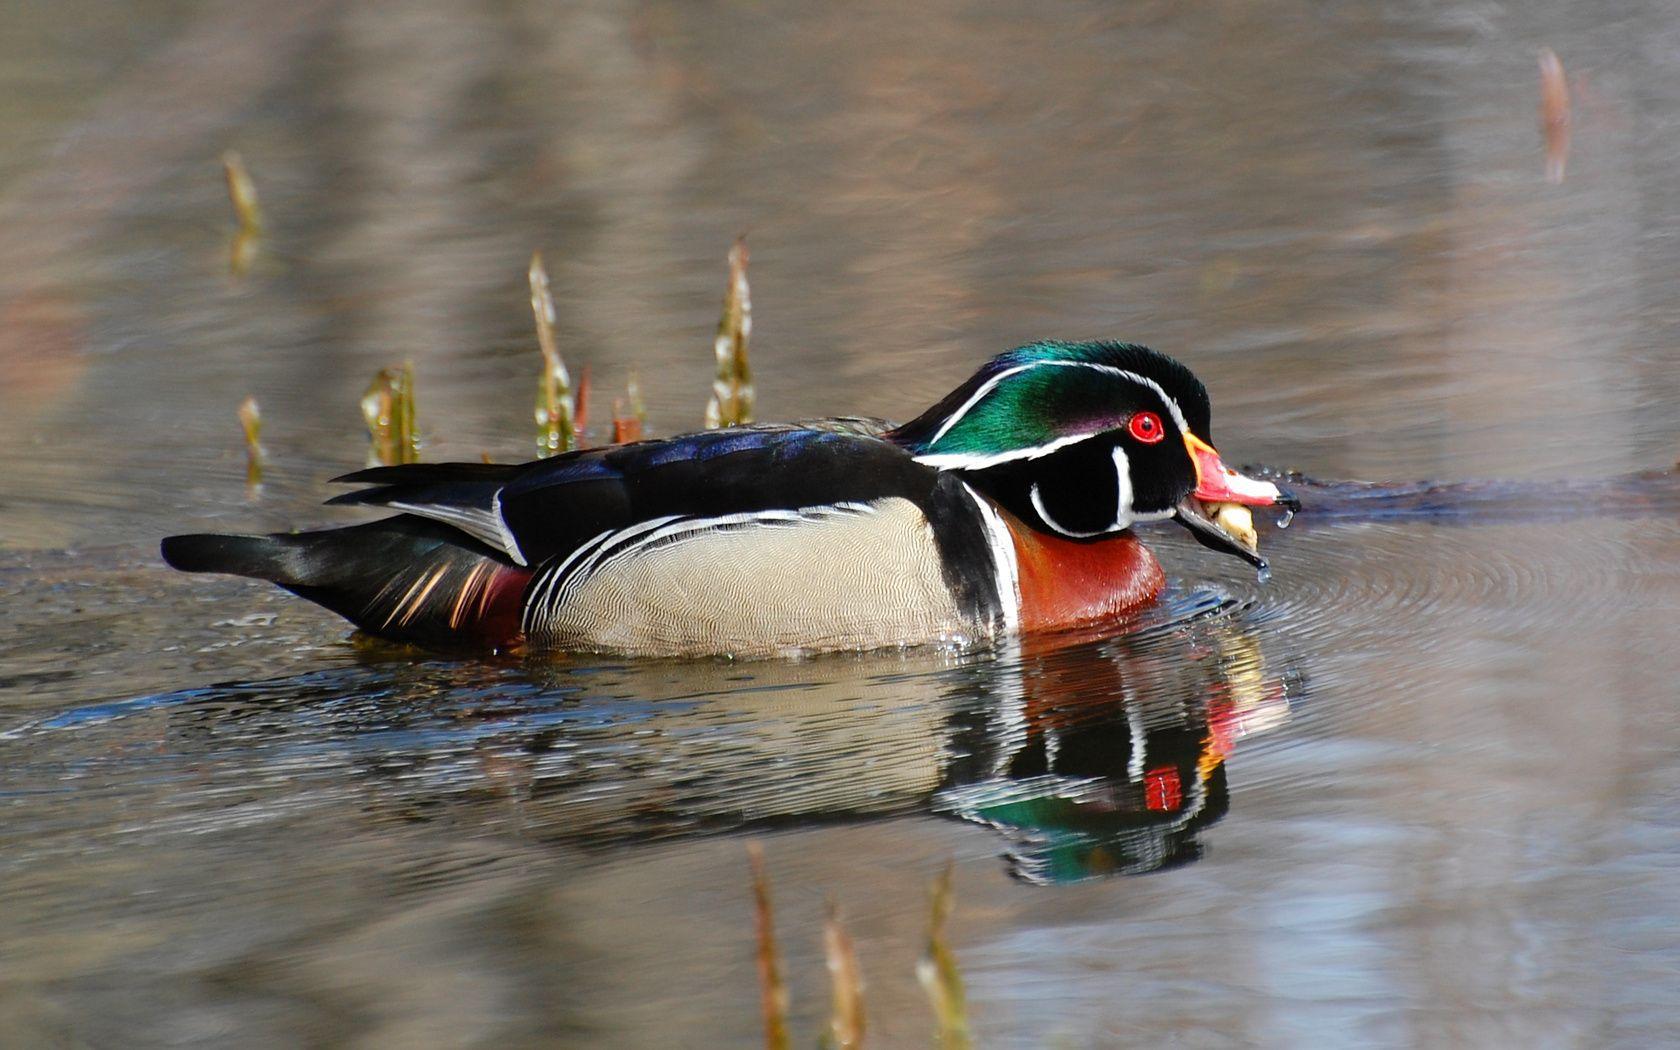 Suzanne Britton Nature Photography: Waterfowl Wallpaper Only